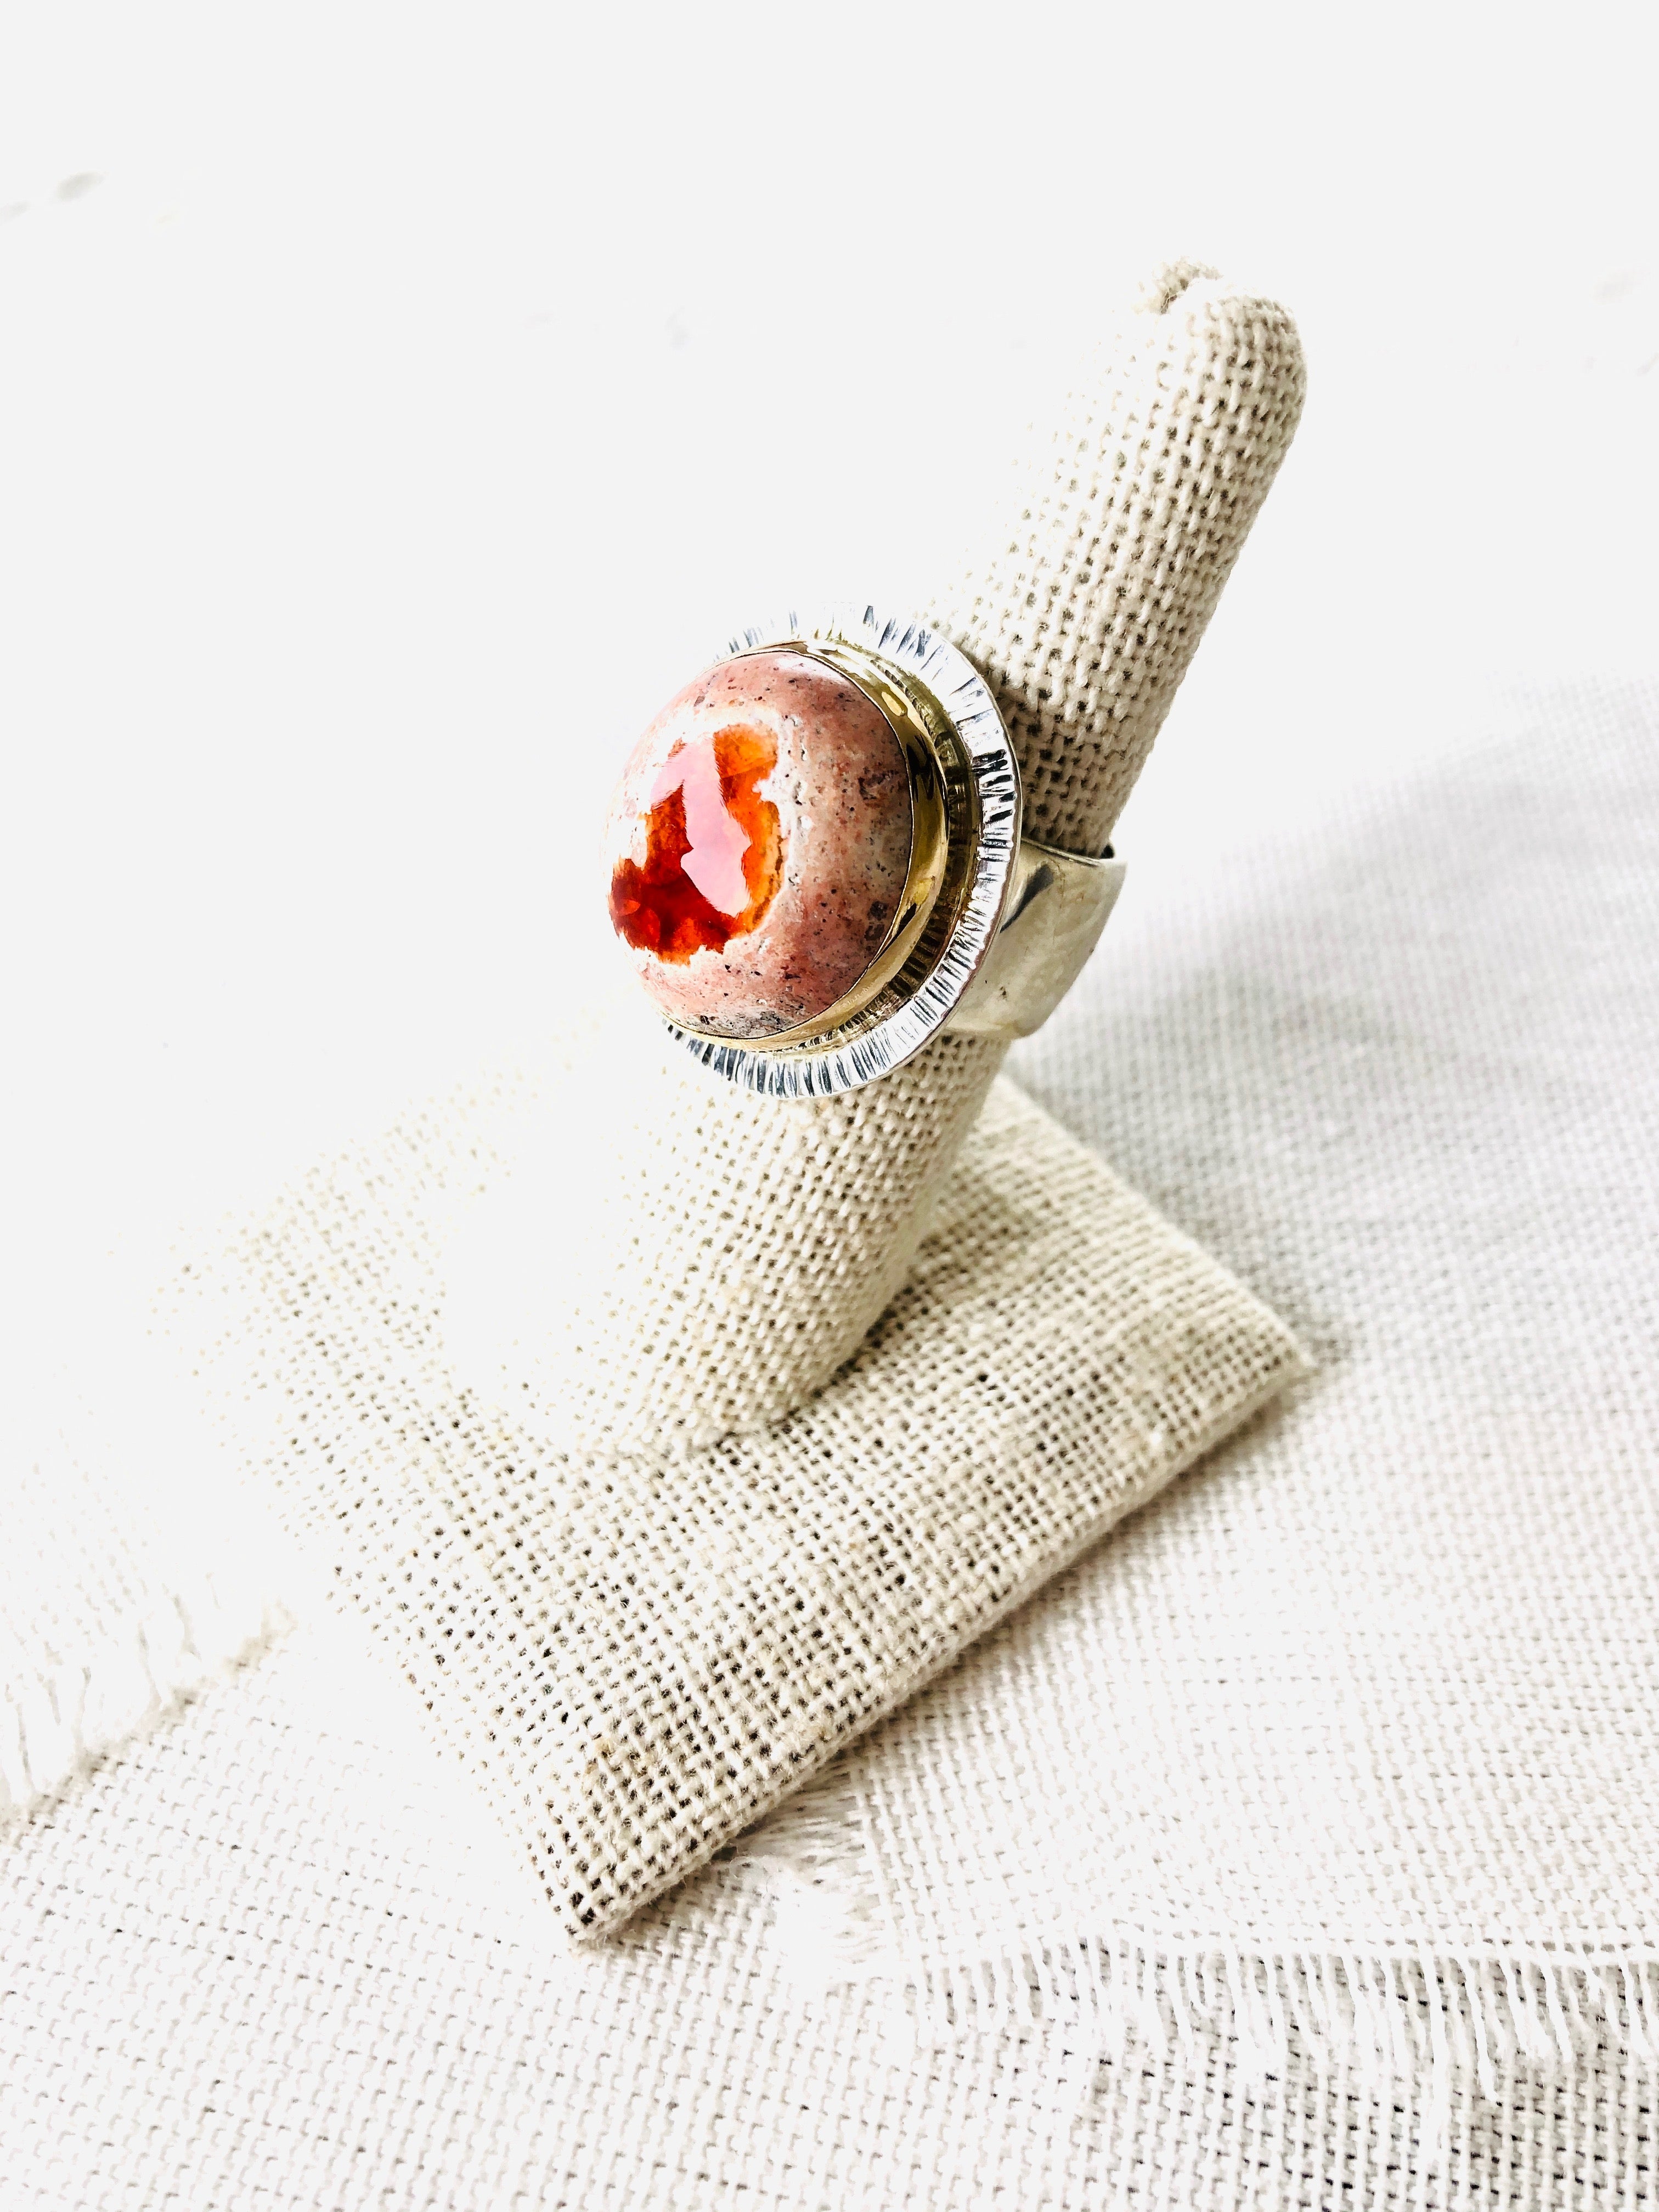 Mexican fire opal ring featured in its natural matrix rock.